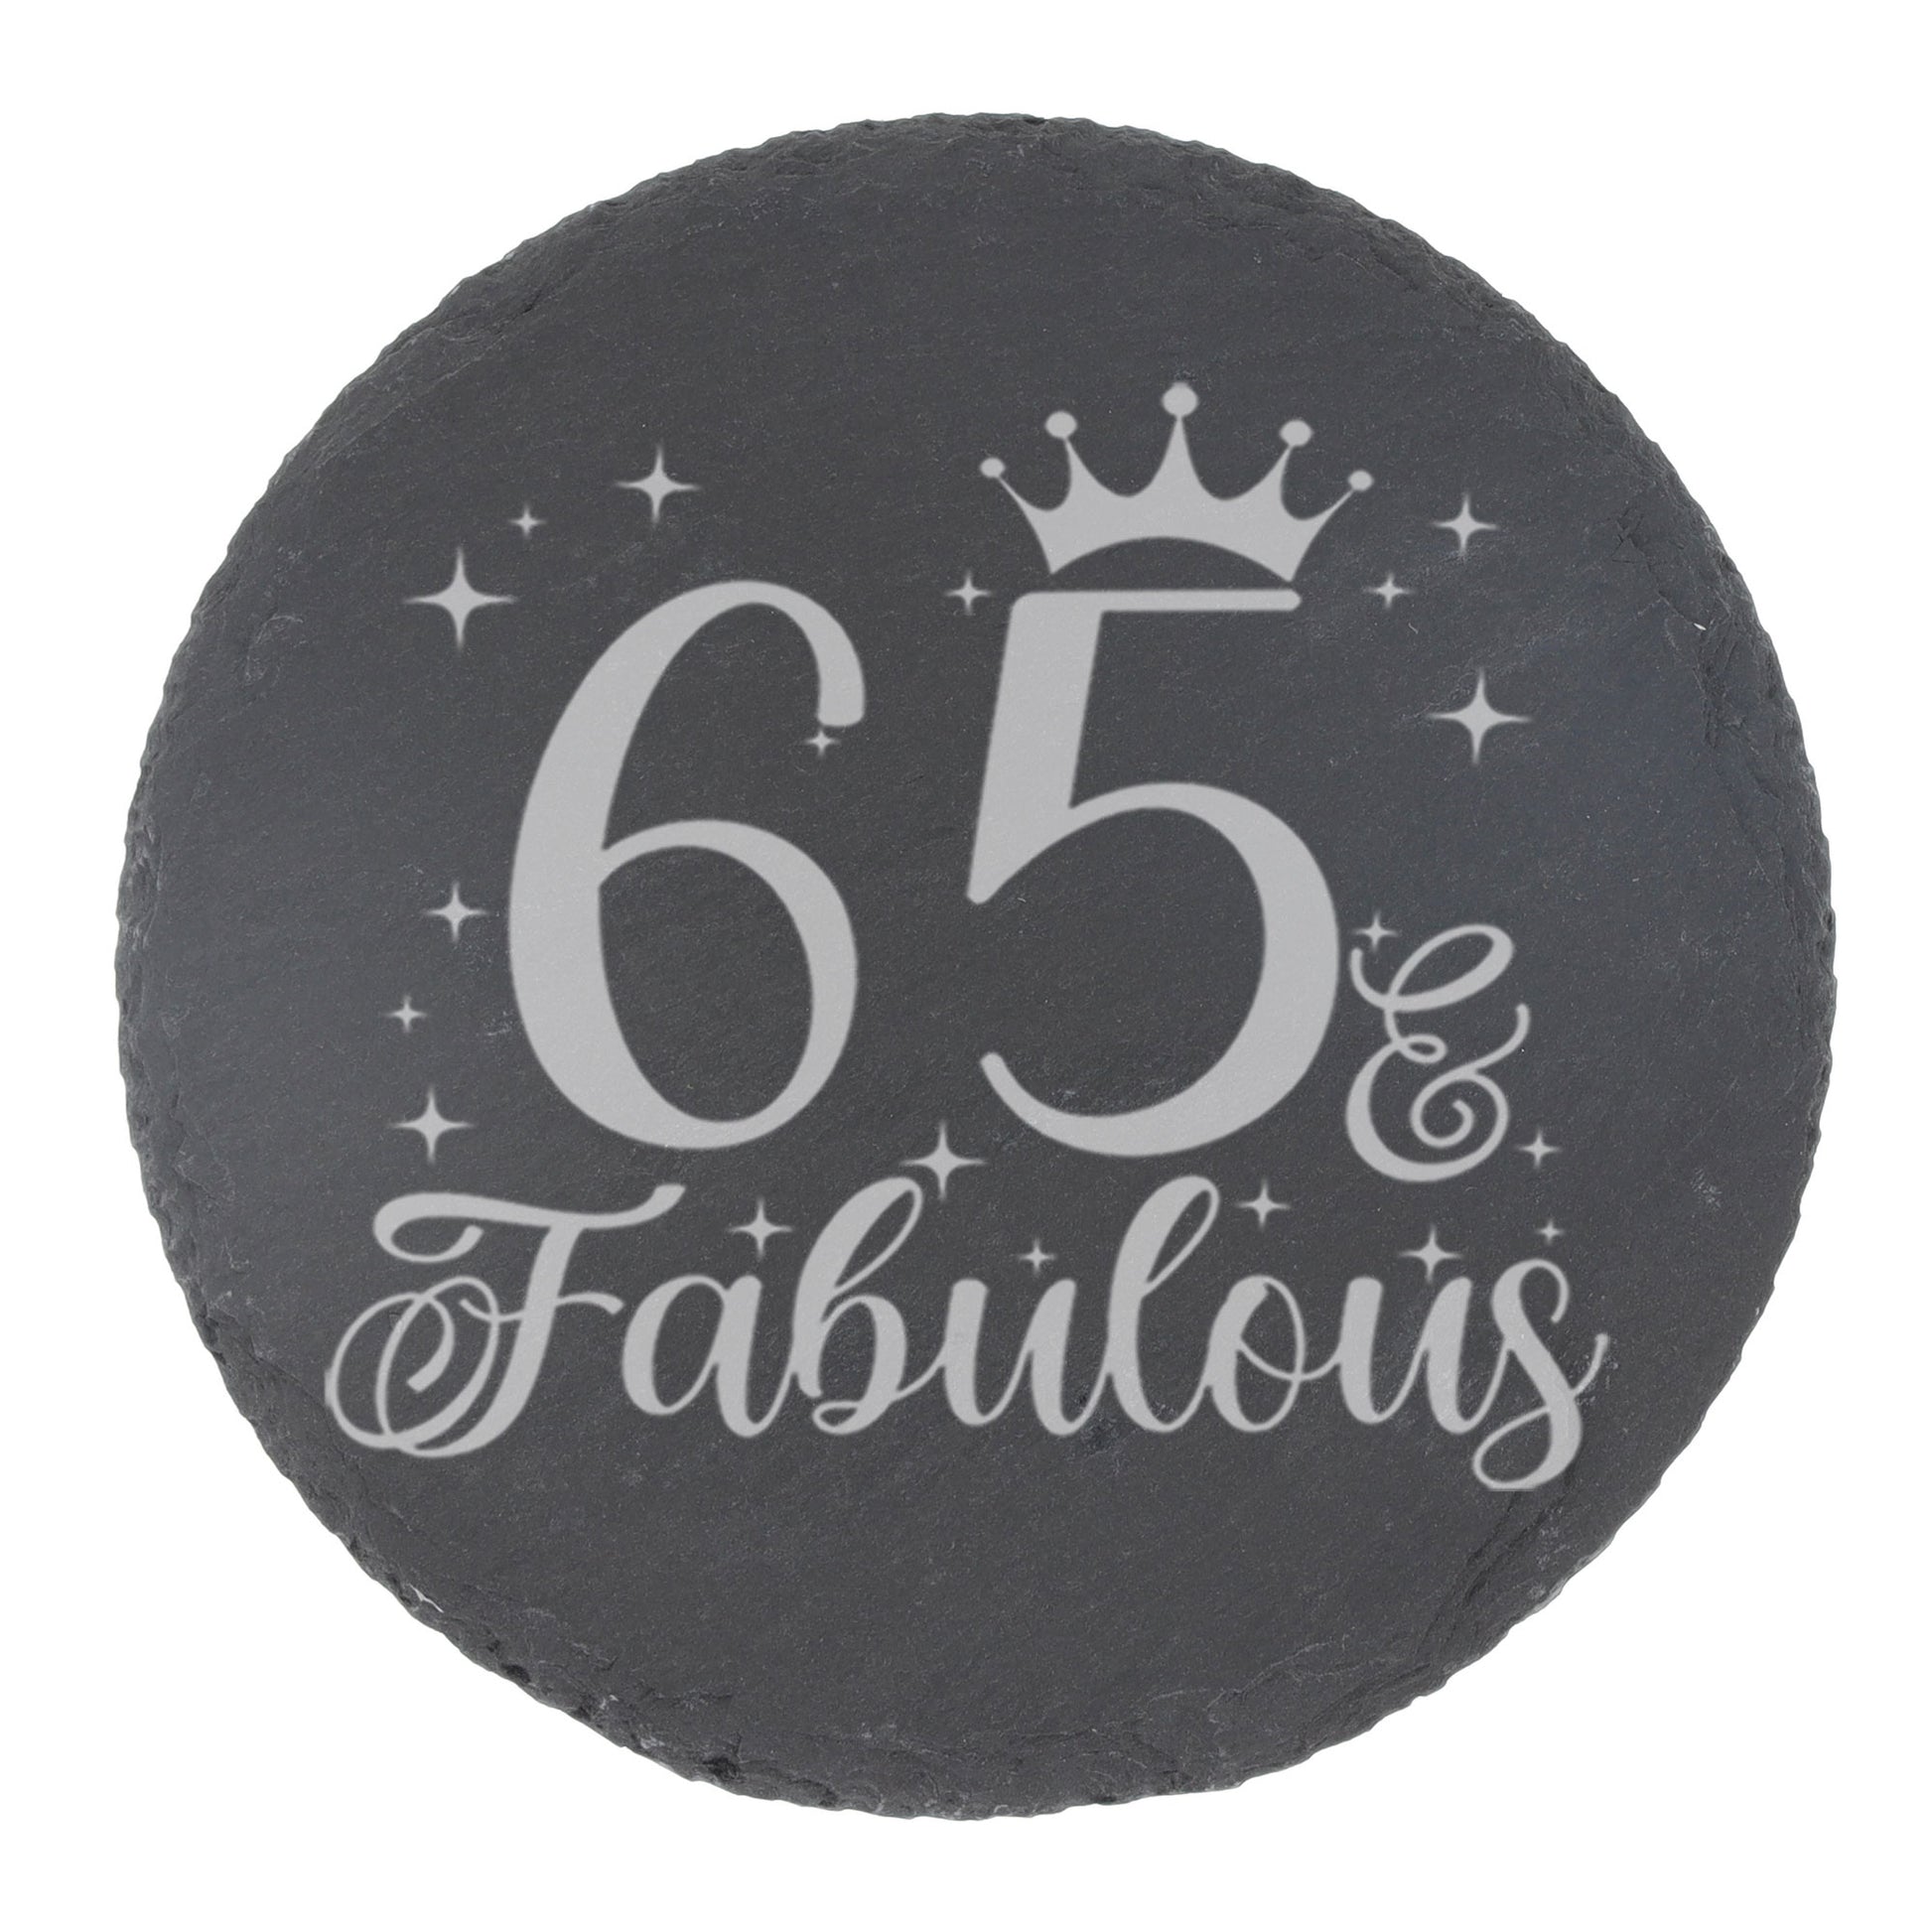 65 & Fabulous 65th Birthday Gift Engraved Wine Glass and/or Coaster Set  - Always Looking Good -   